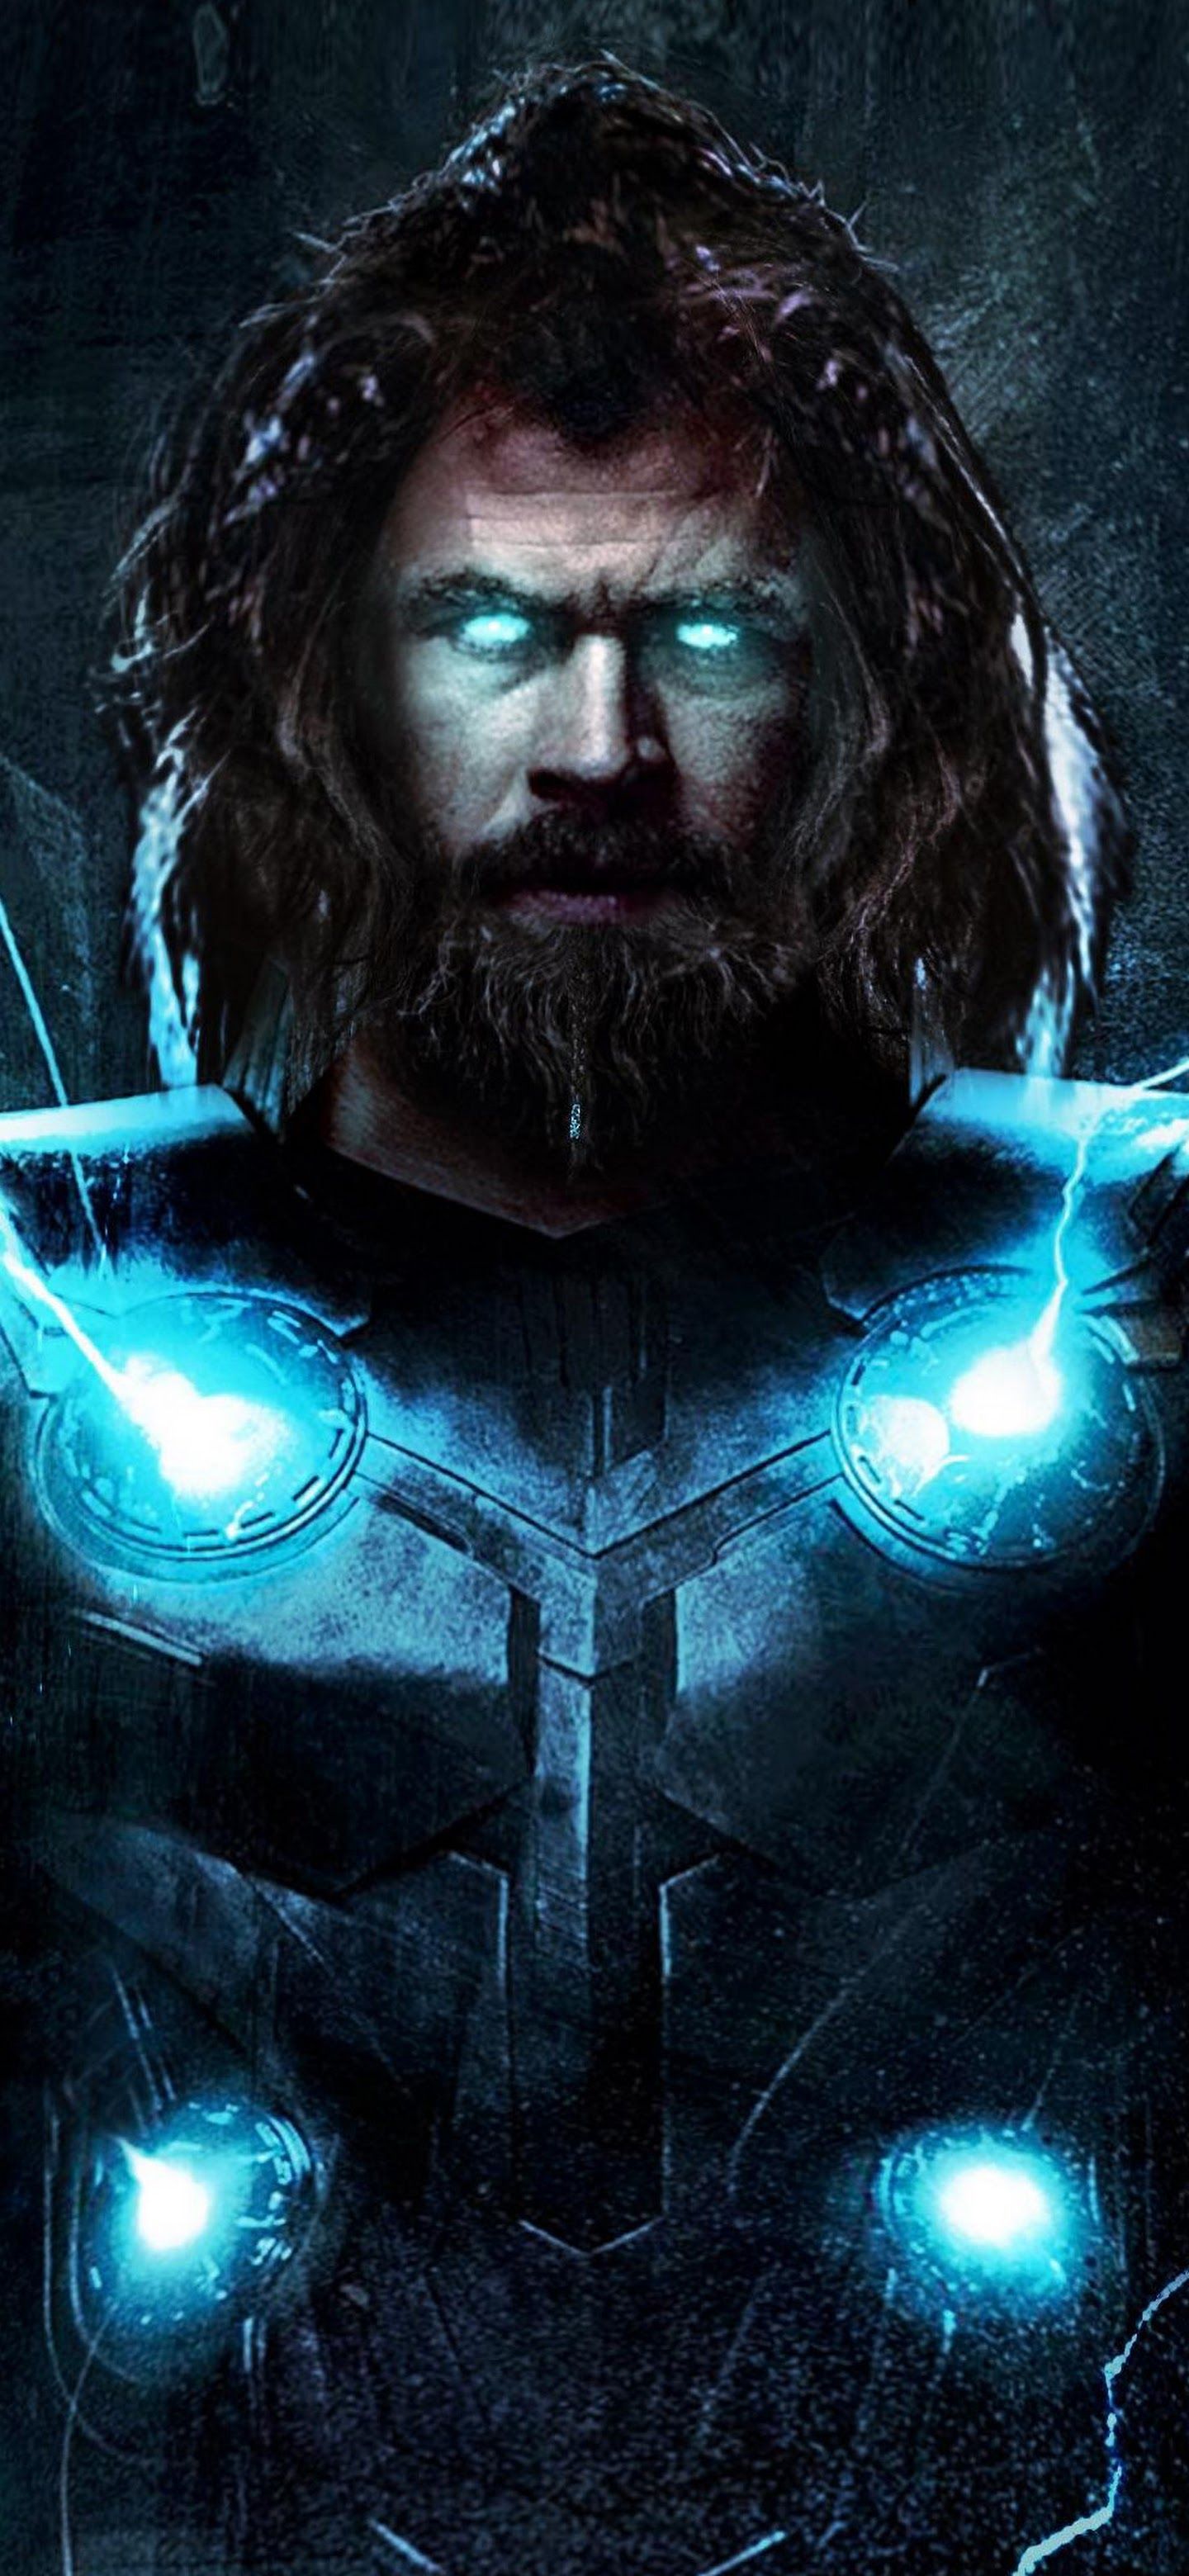 Avengers Endgame Thor iPhone Wallpapers - Wallpaper Cave